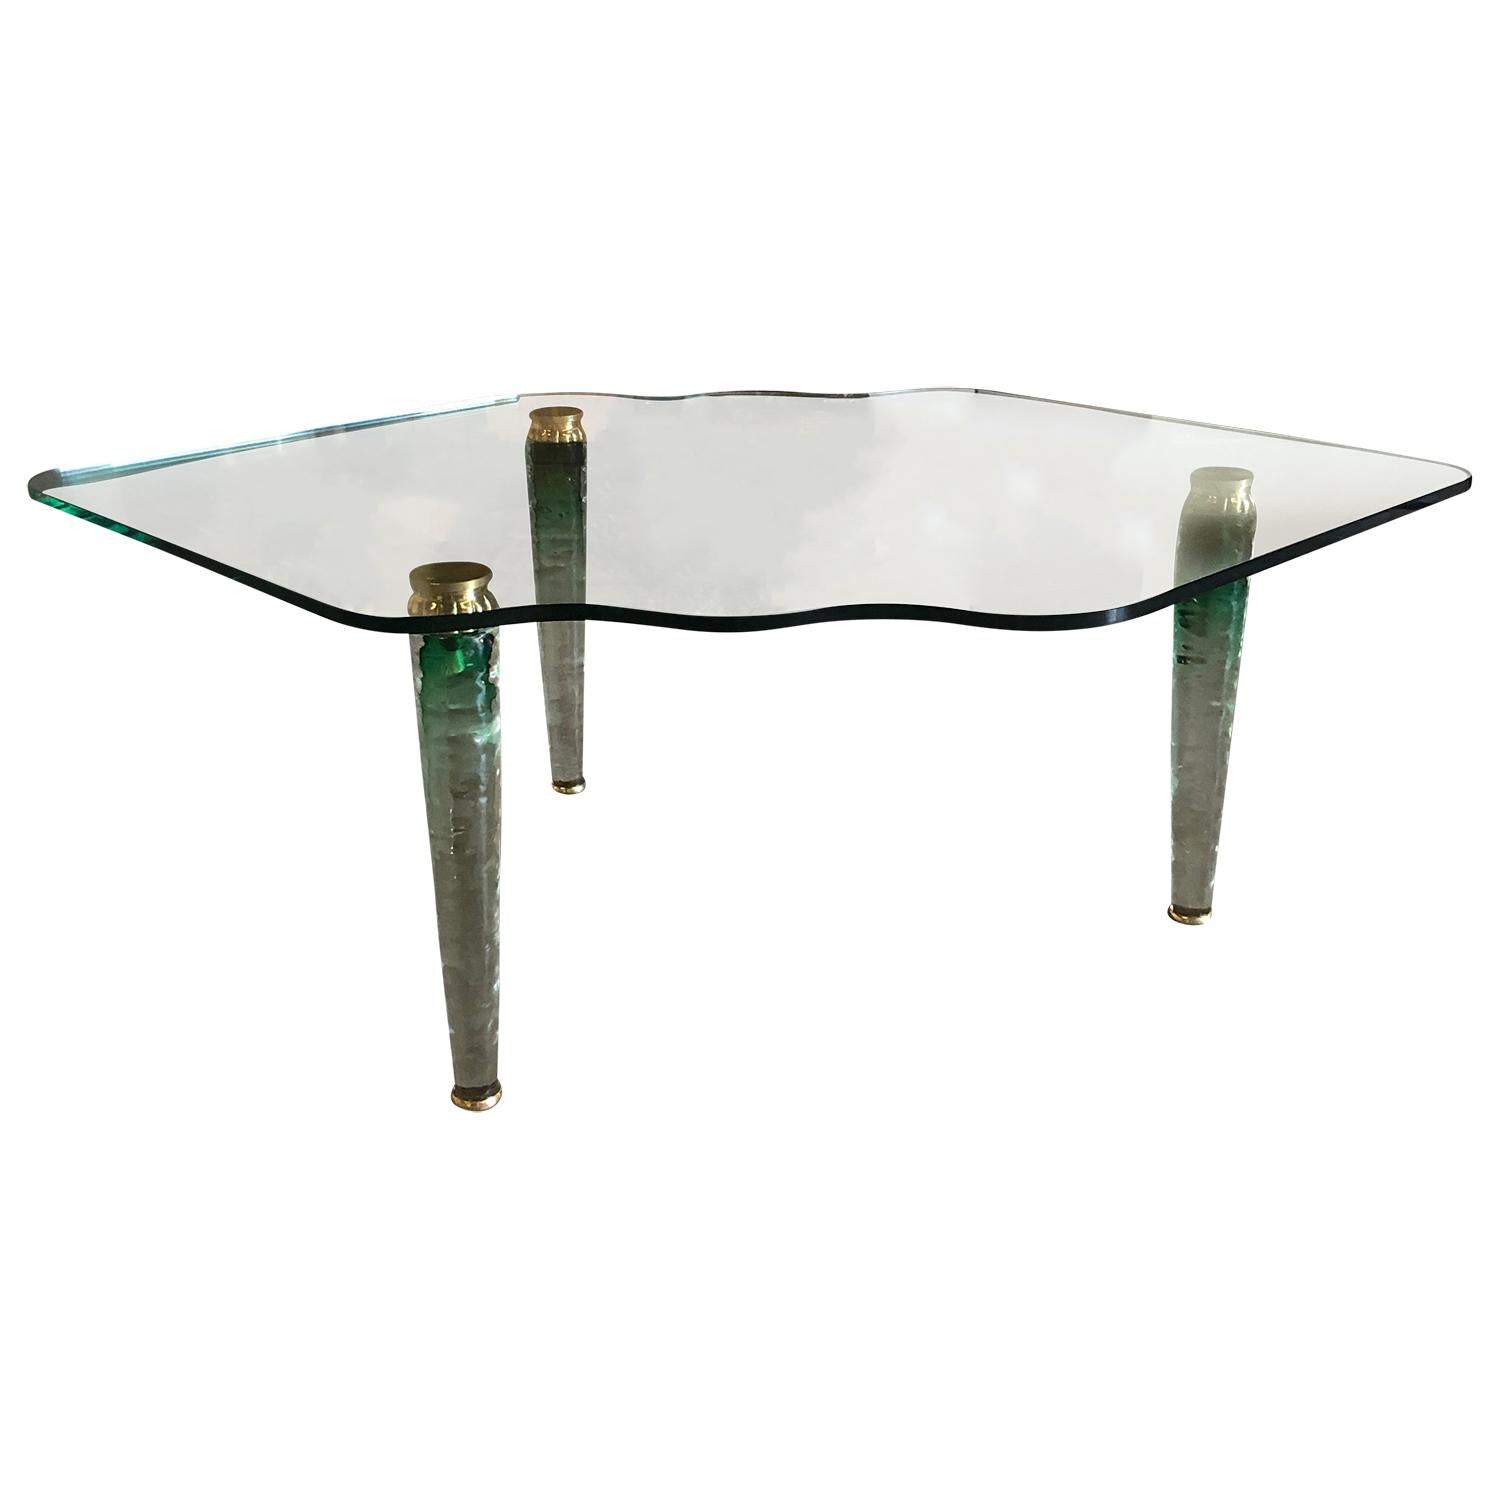 A vintage Mid-Century Modern Italian green tinted coffee table made of hand blown Murano glass and brass in the style of Danny Lane. Green glass top on three ombre green tapered legs. Wear consistent with age and use. Minor losses on one leg, circa